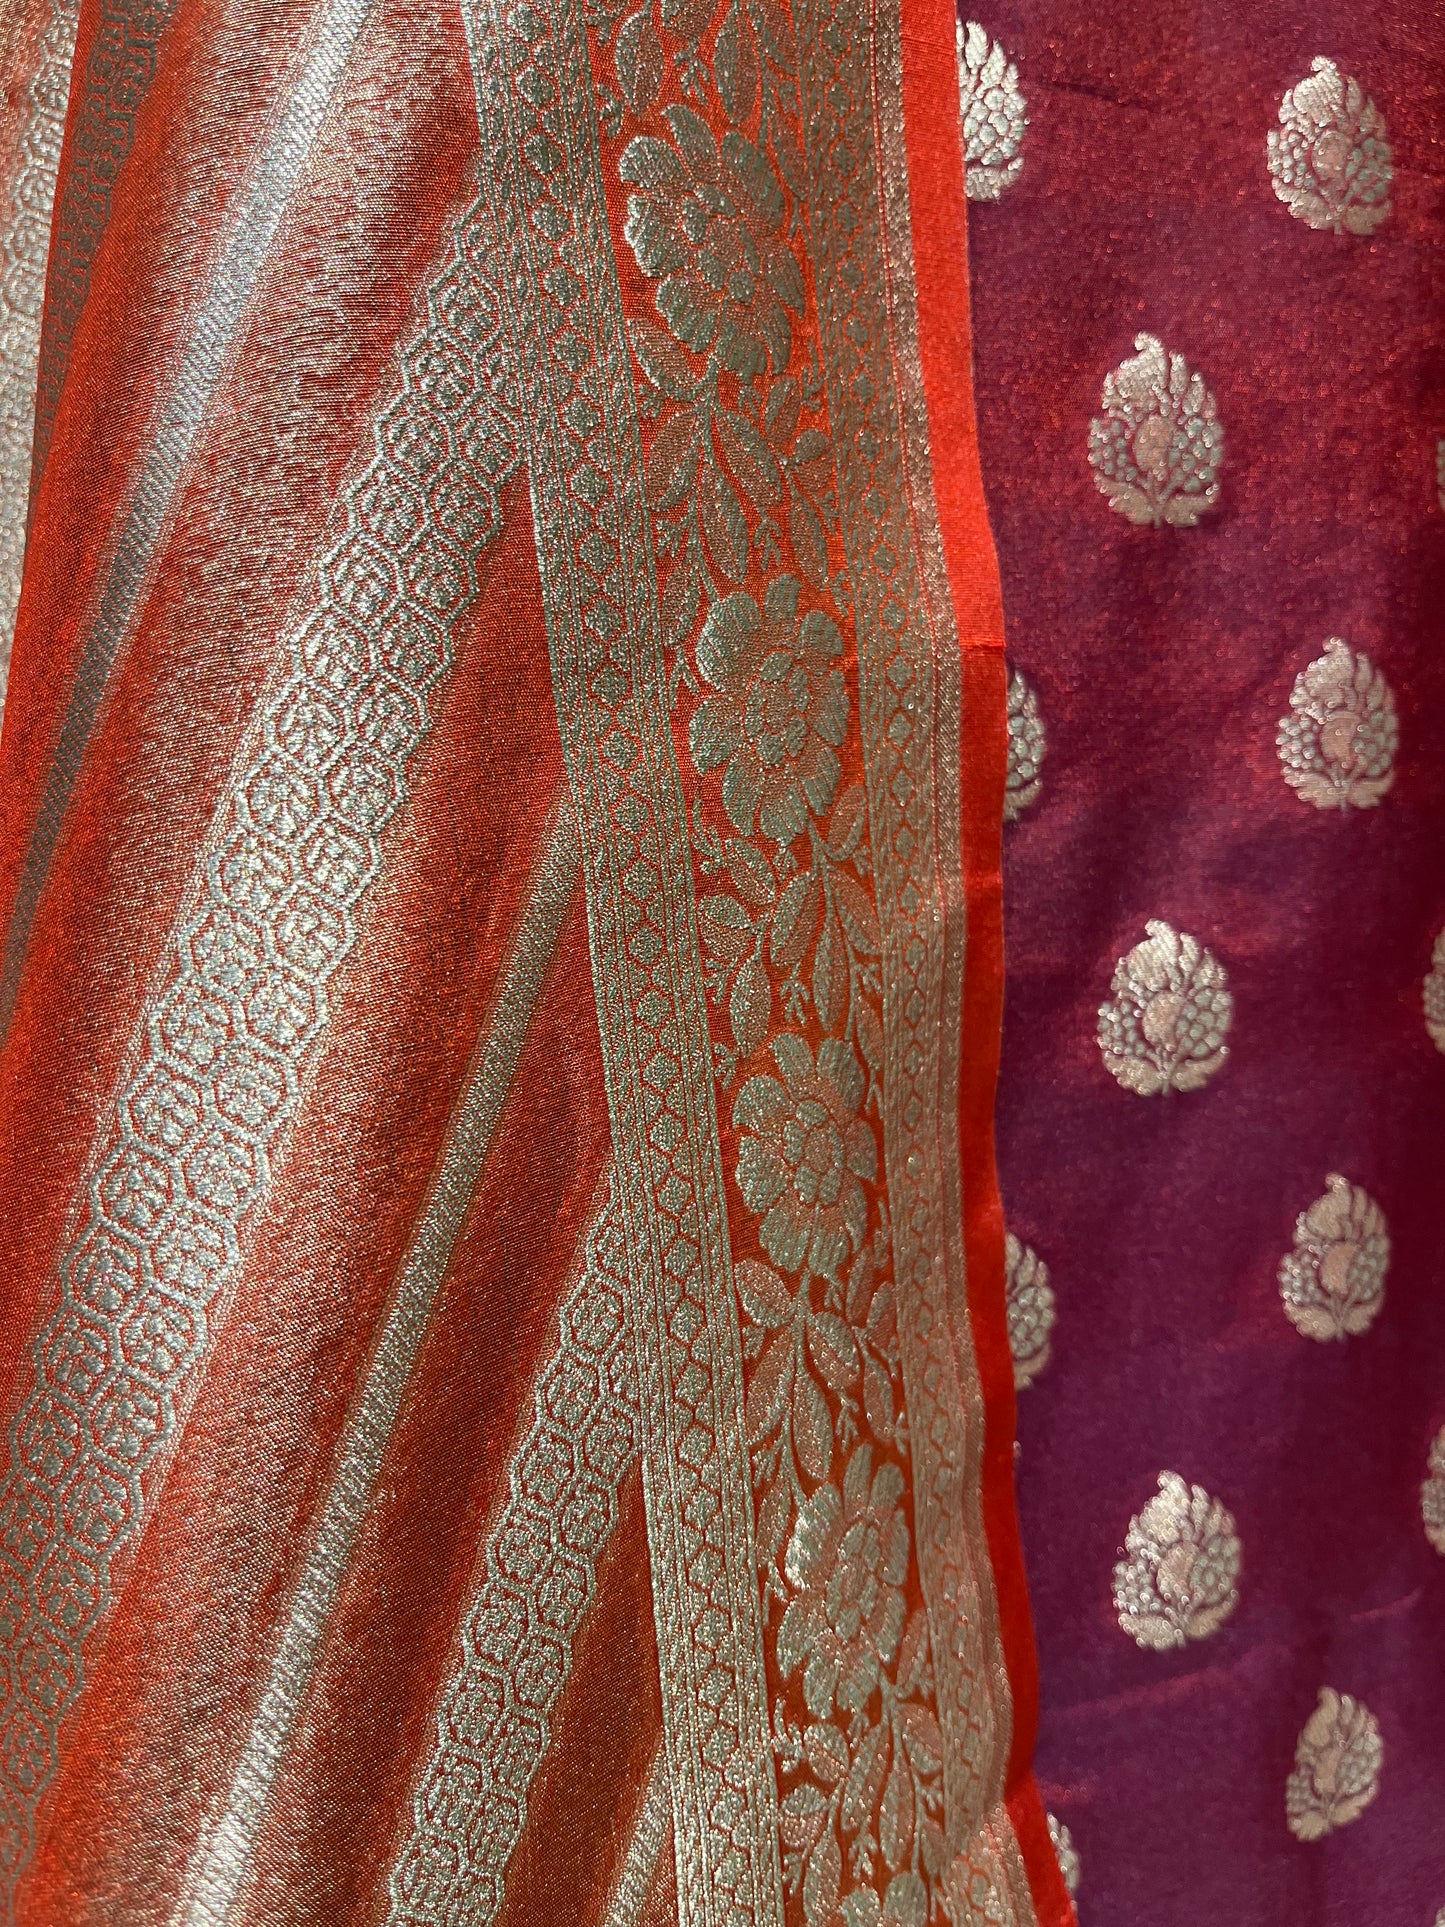 WINE COLOR BANARASI PURE SILK UNSTITCHED SUIT EMBELLISHED WITH ZARI WEAVES